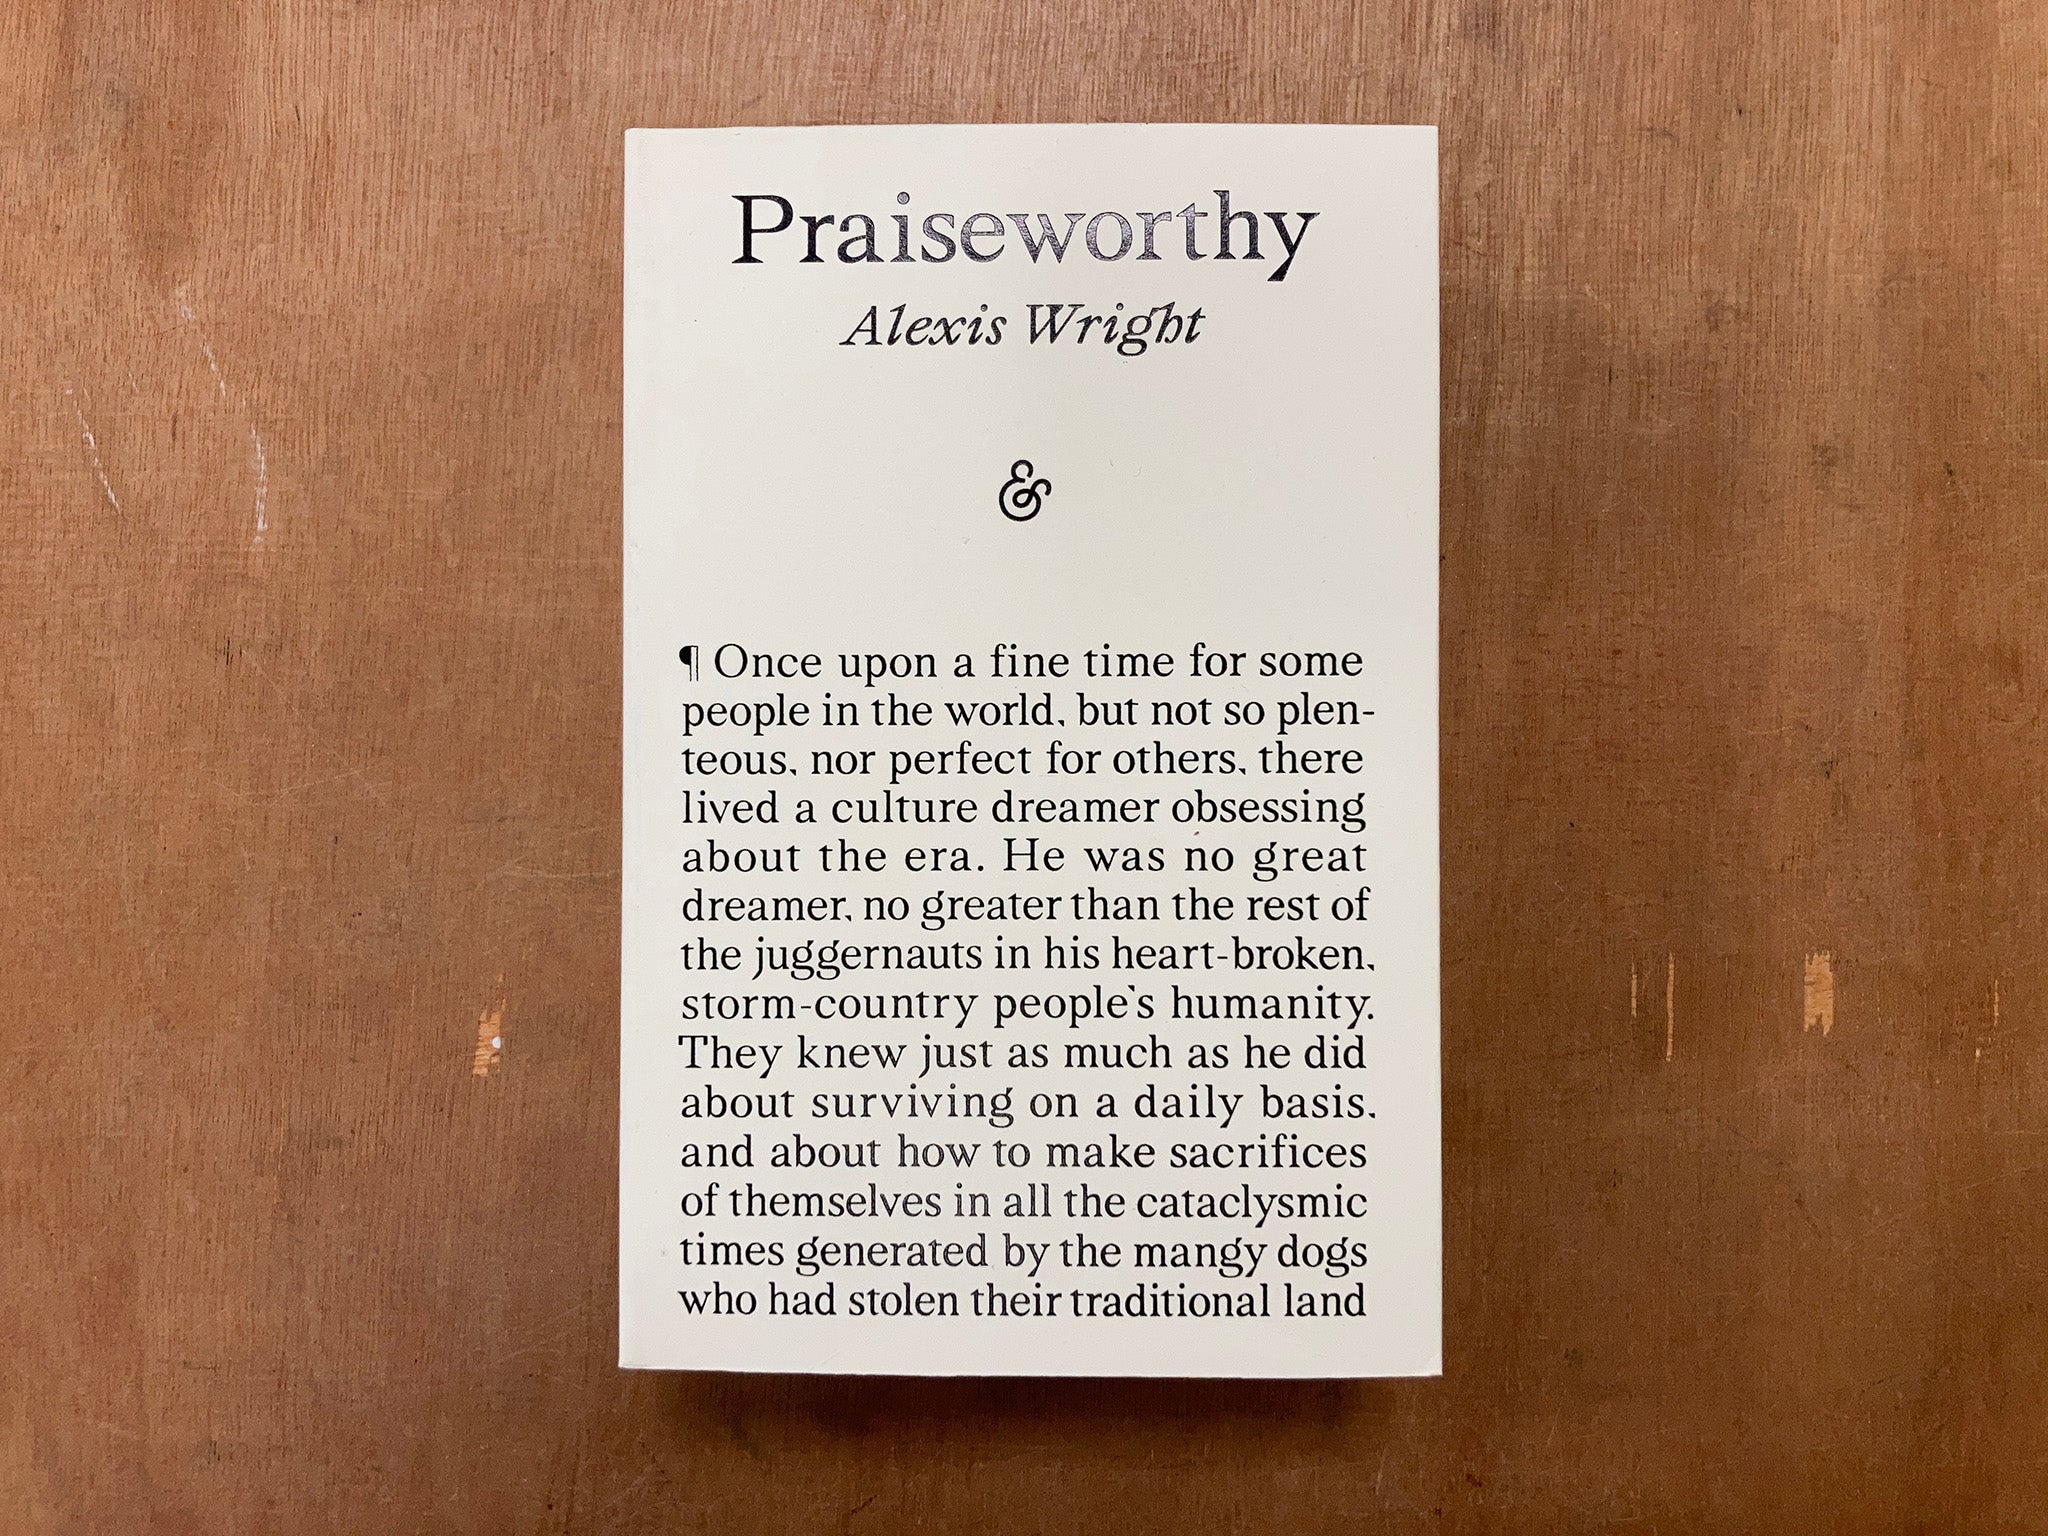 PRAISEWORTHY by Alexis Wright